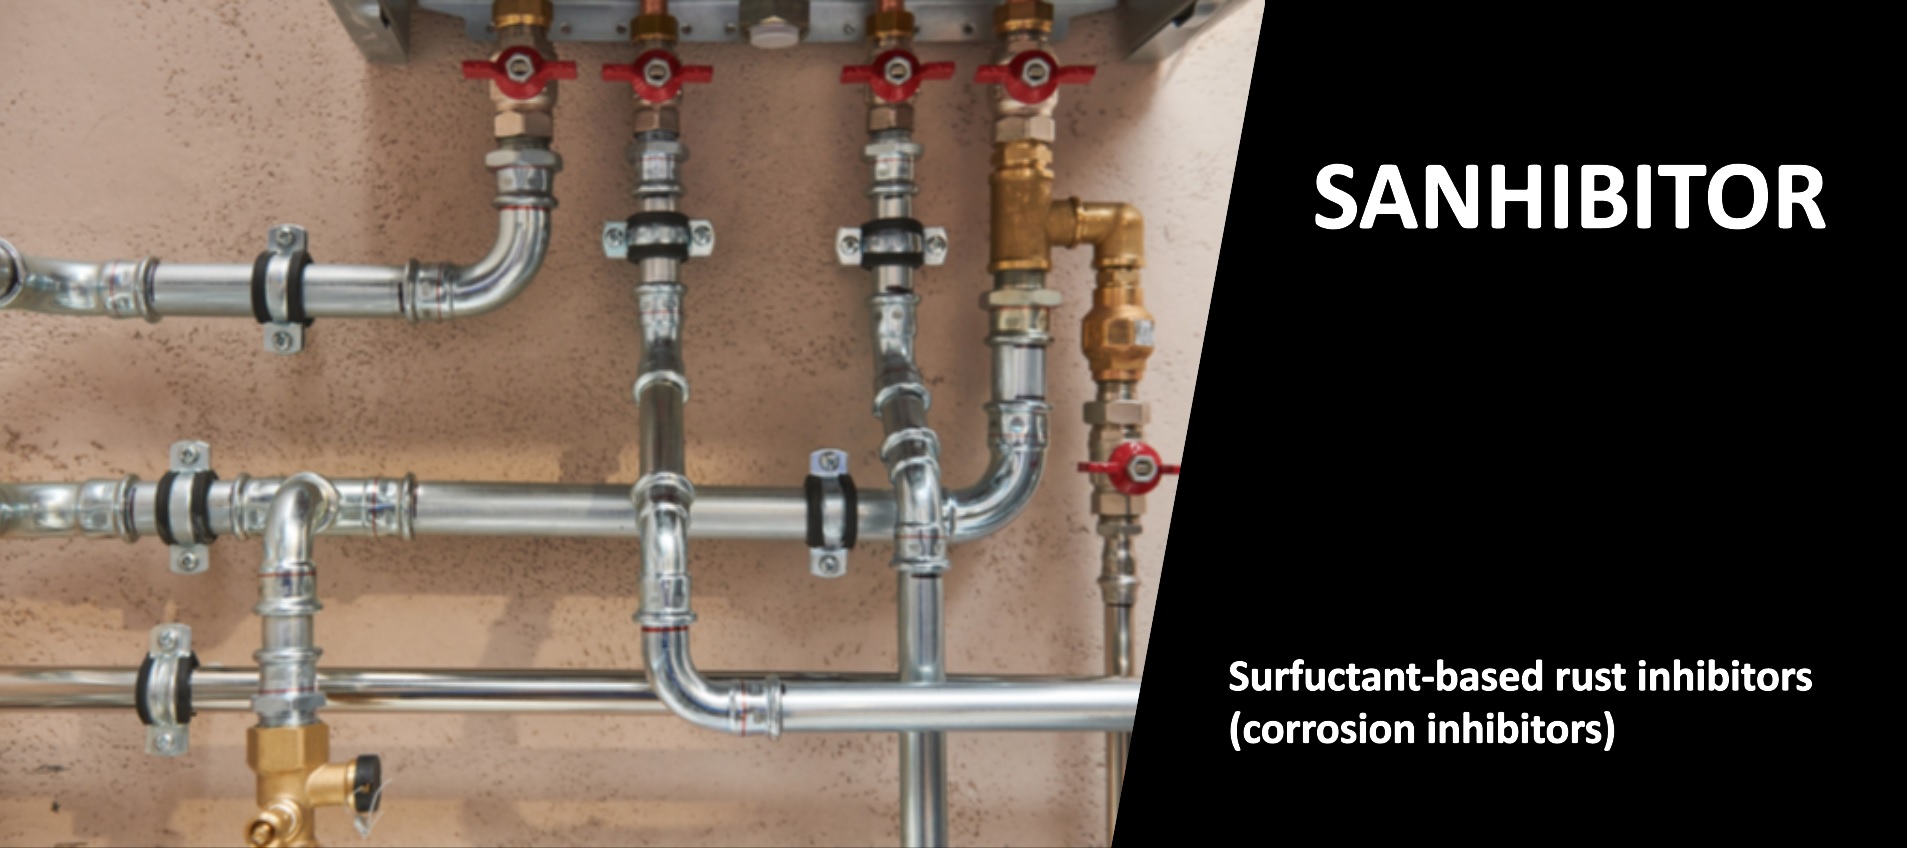 Surfactant-based rust inhibitors (corrosion　inhibitors)"SANHIBITOR" page is now open.